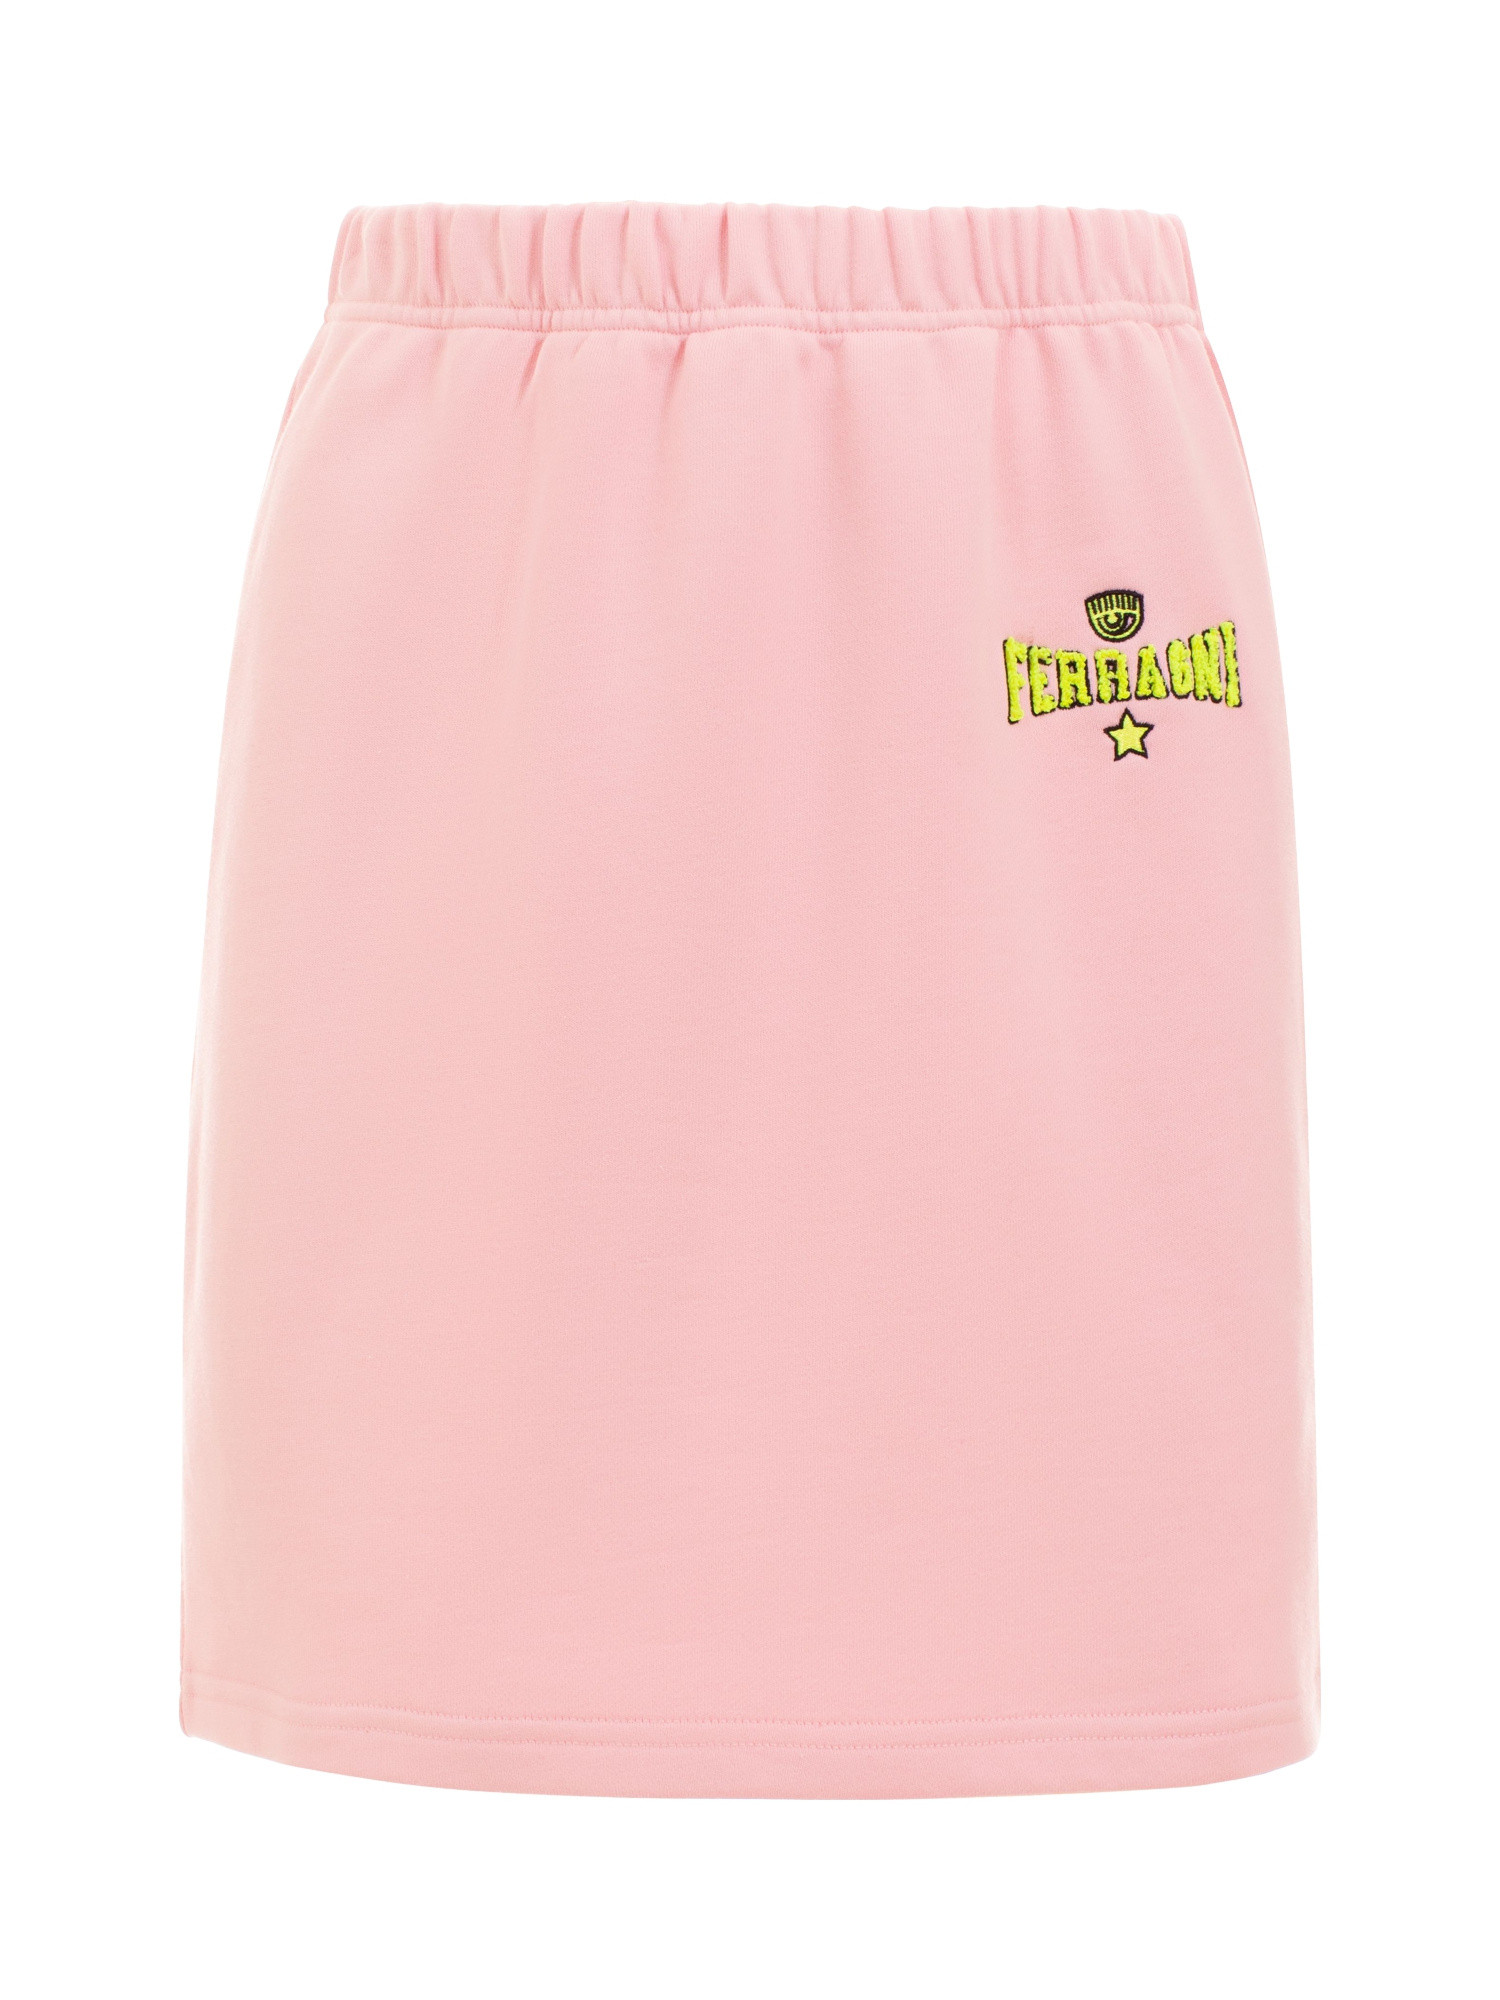 Chiara Ferragni - Regular fit skirt with elasticated waist and sponge embroidered logo, Pink, large image number 0